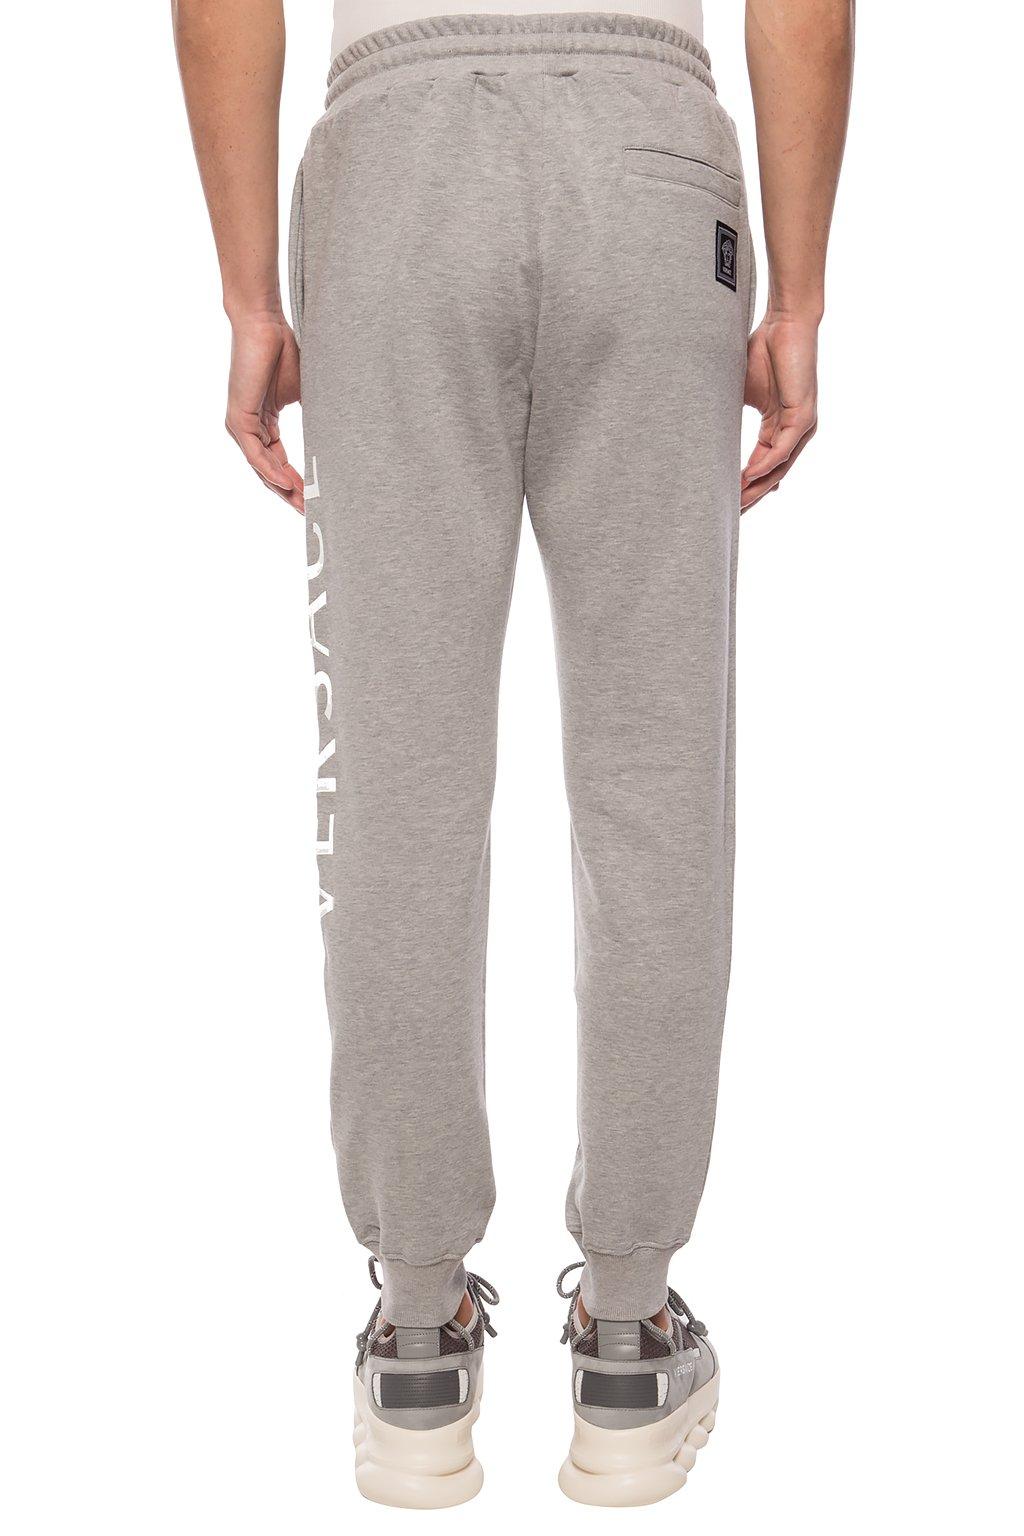 Versace Cotton Logo-embroidered Sweatpants in Grey (Gray) for Men - Lyst